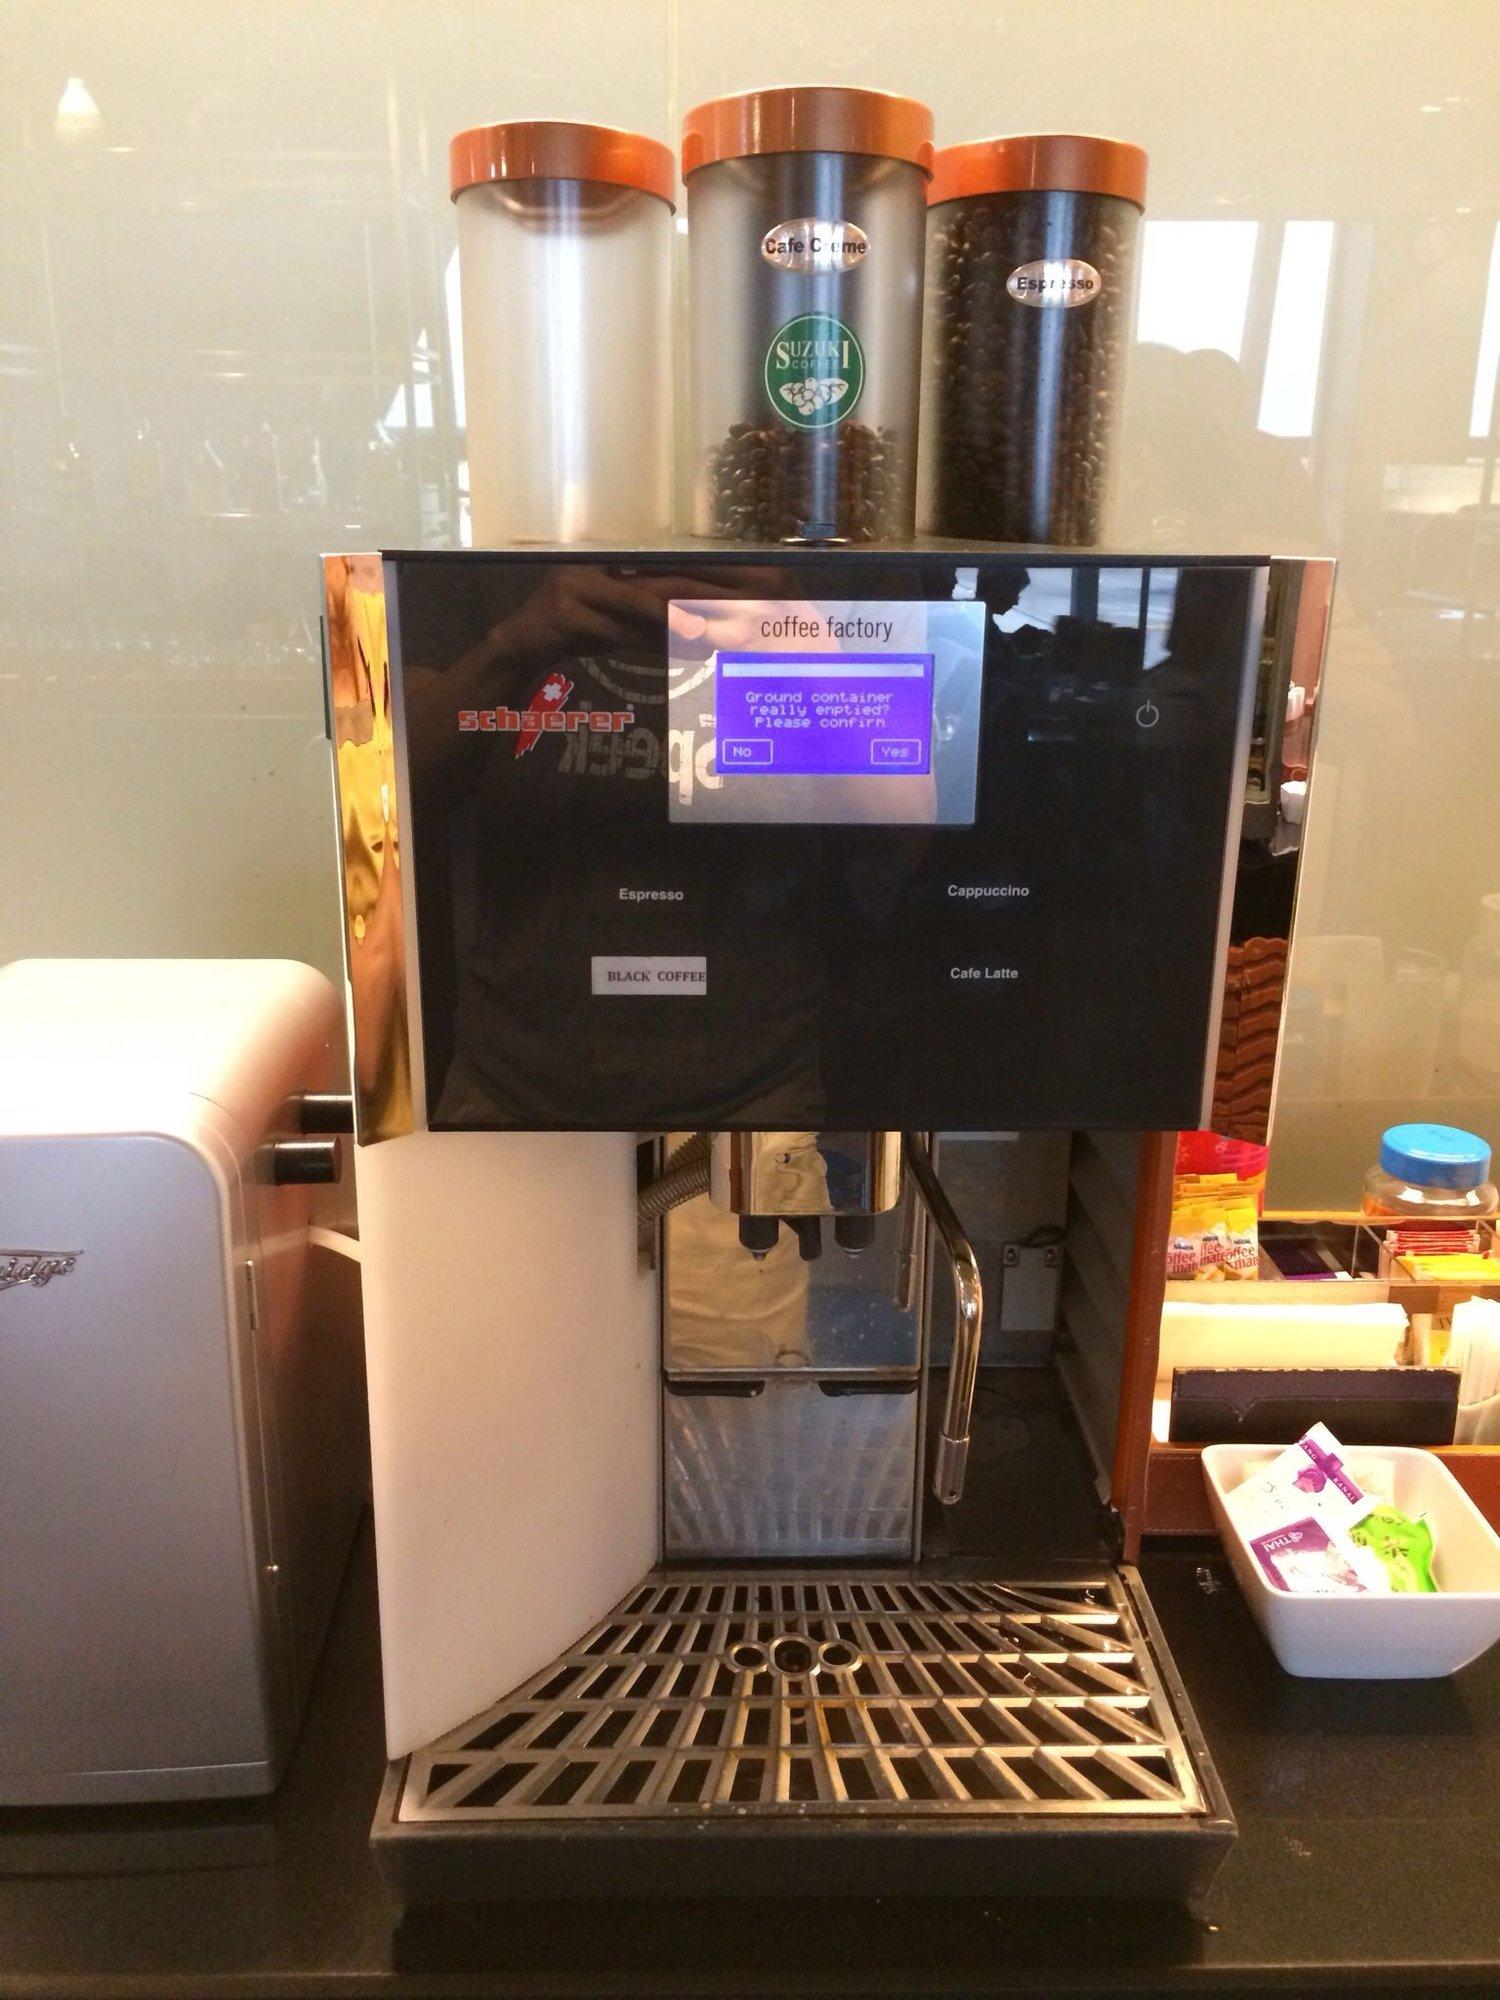 Thai Airways Royal Orchid Lounge image 8 of 15